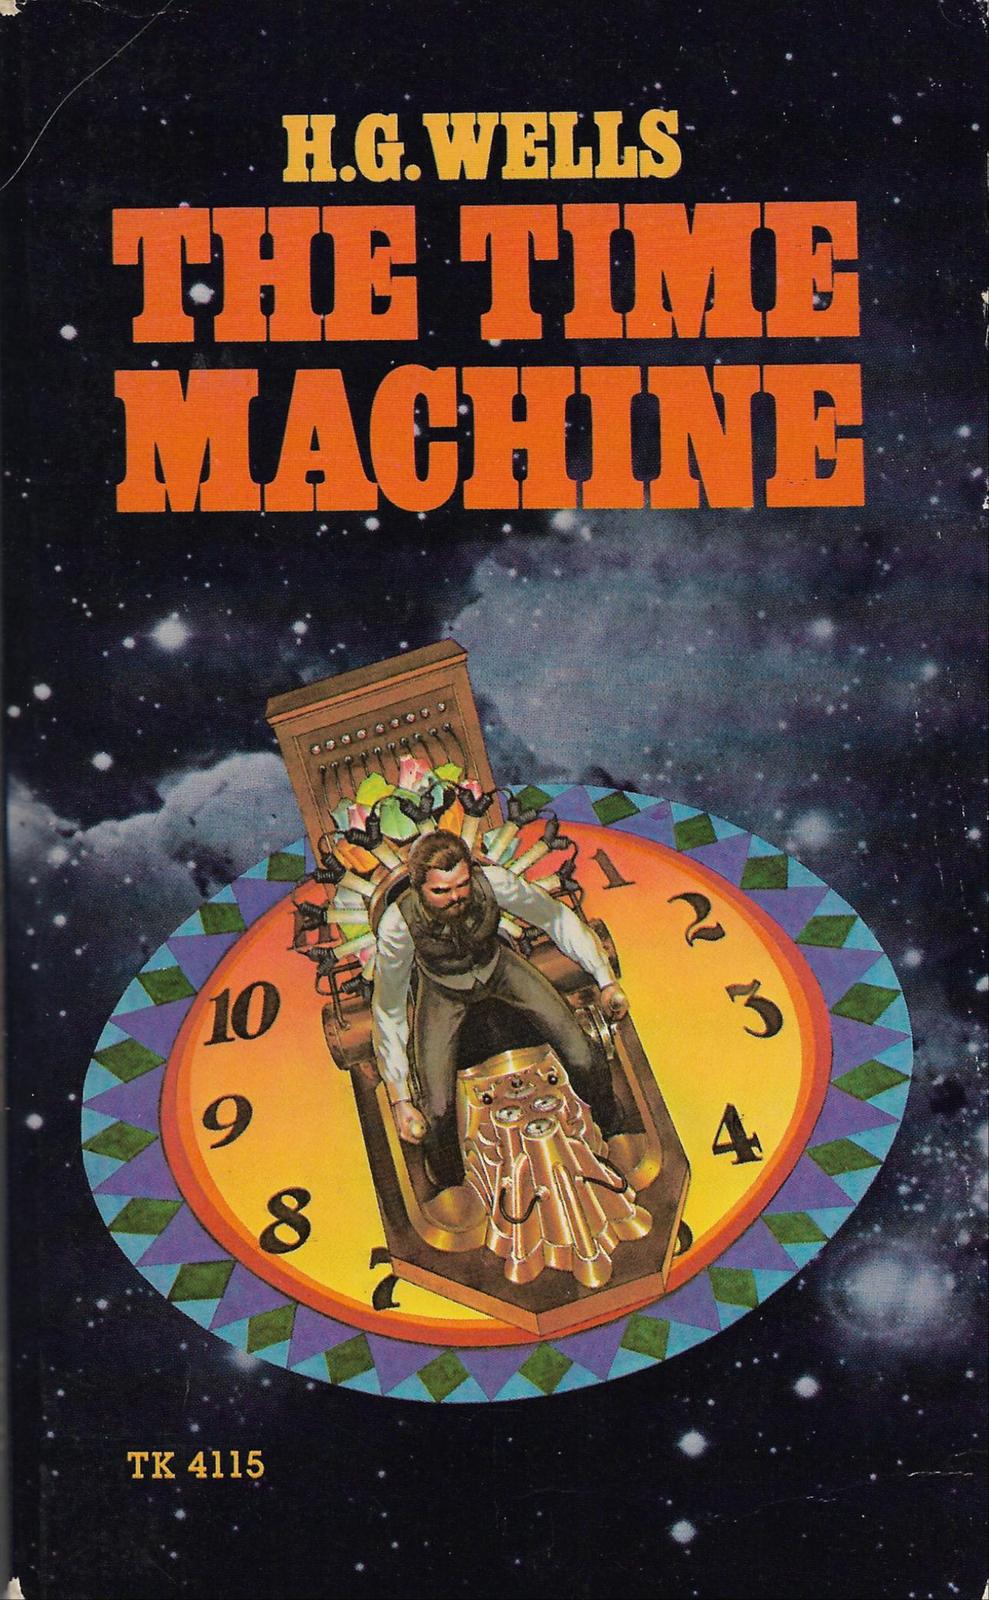 H. G. Wells: The Time Machine (1978, Scholastic Book Services)